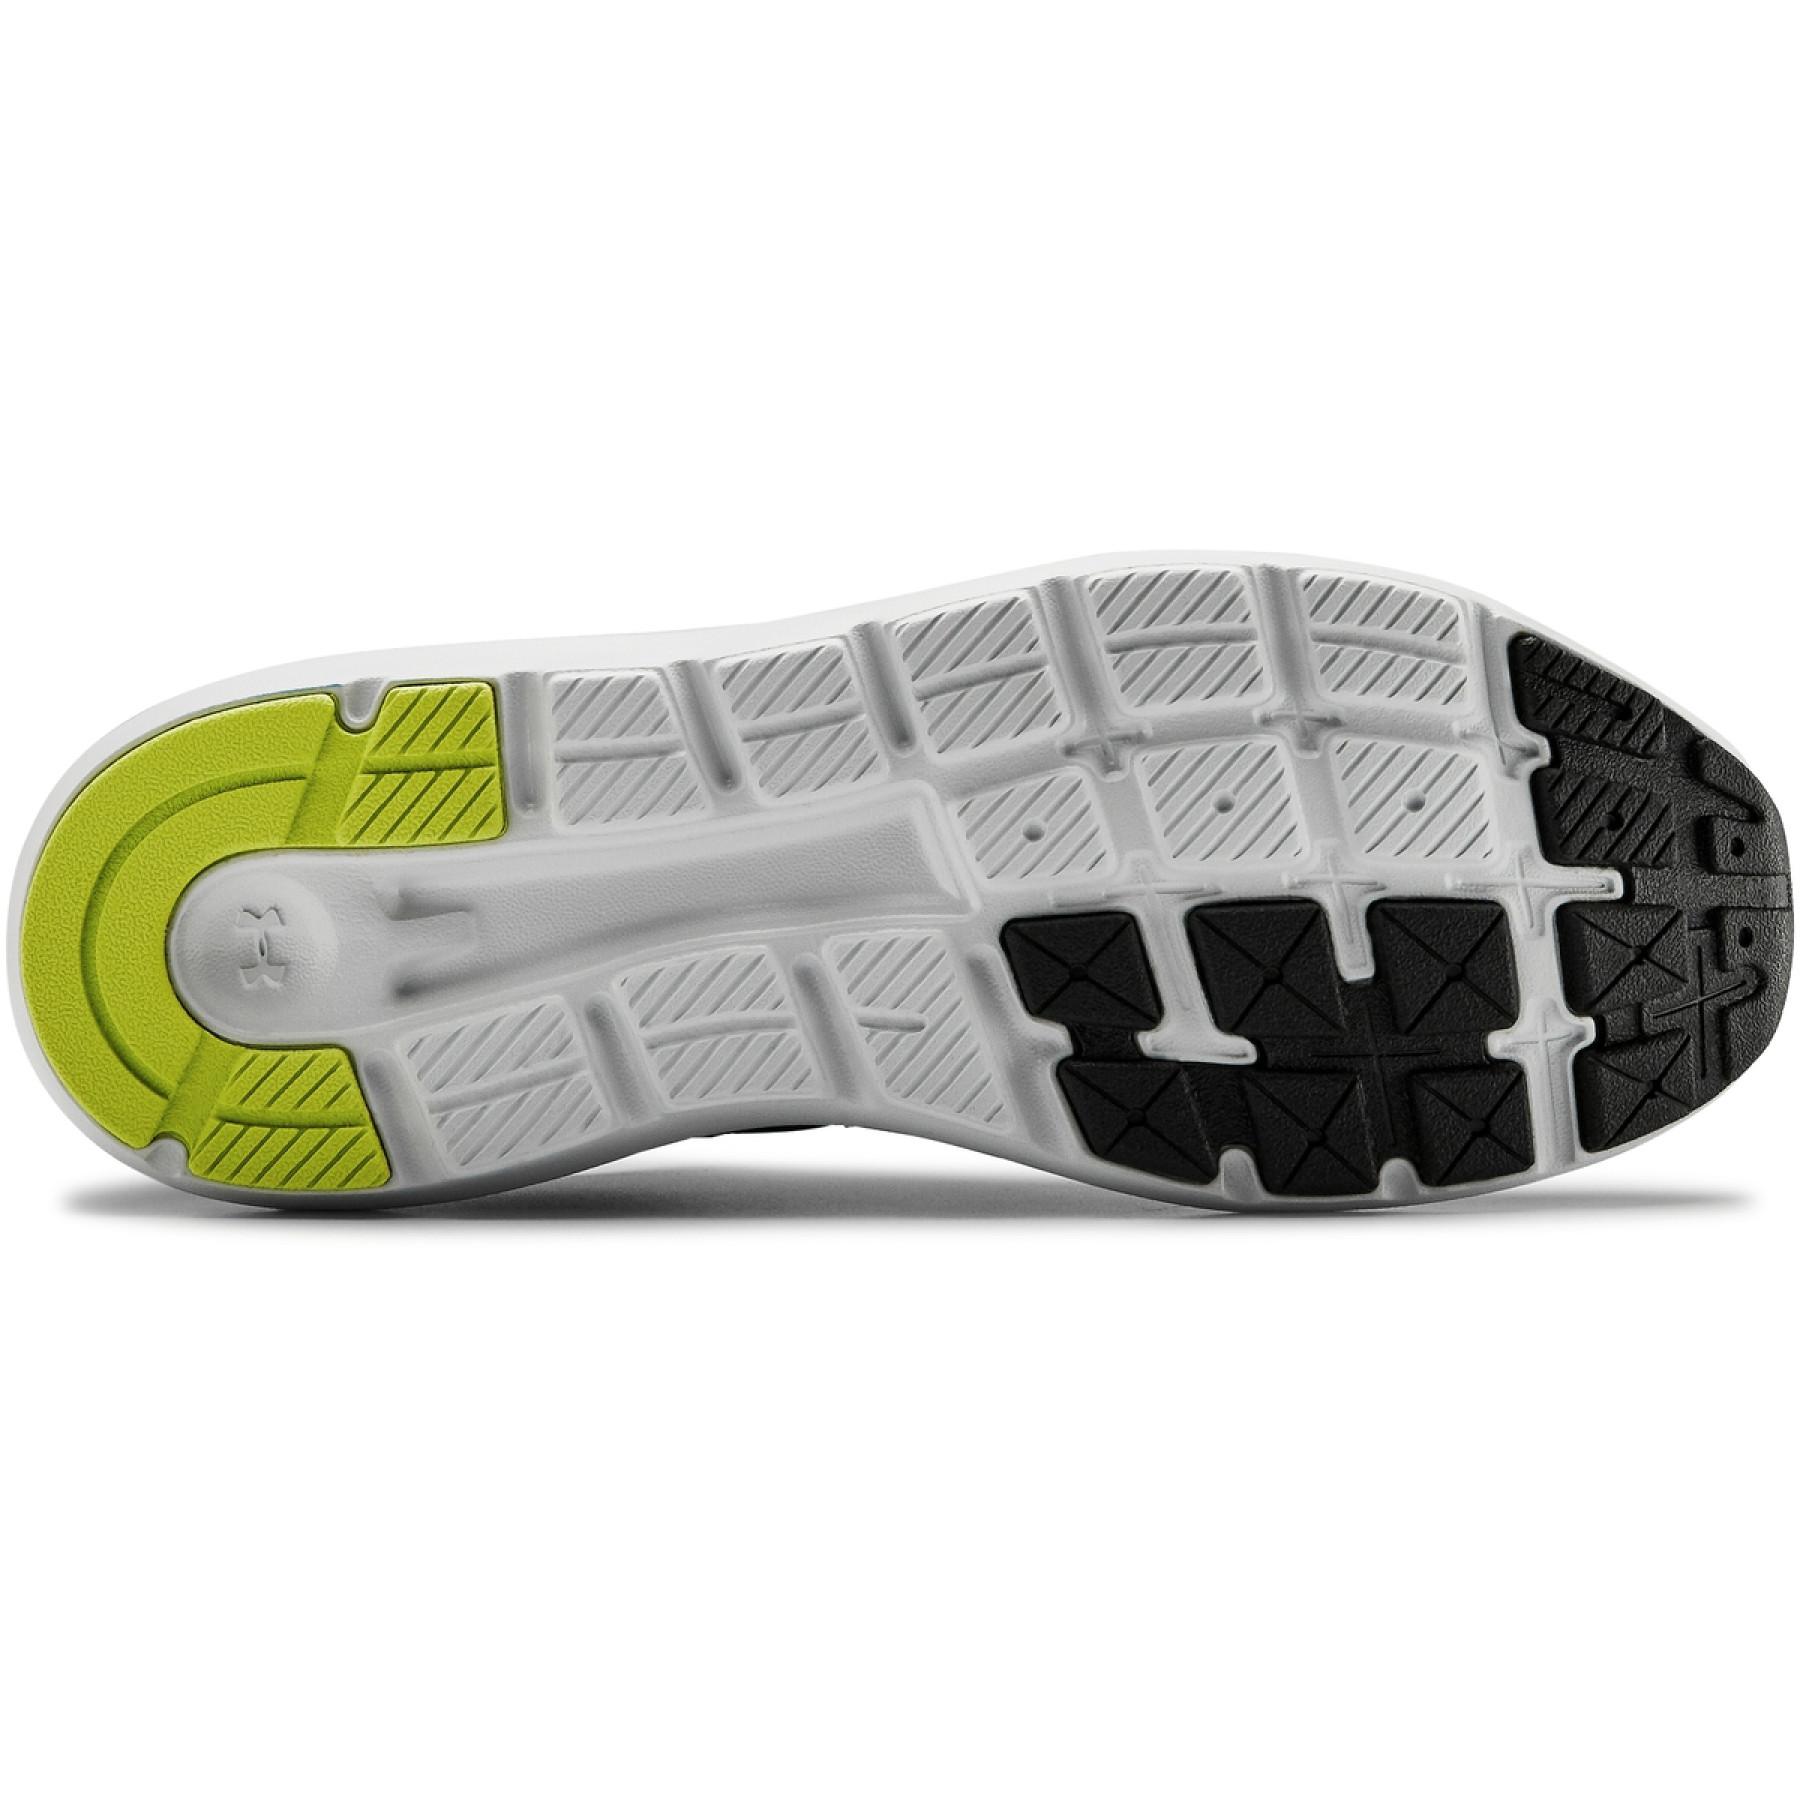 Running shoes Under Armour Surge 2